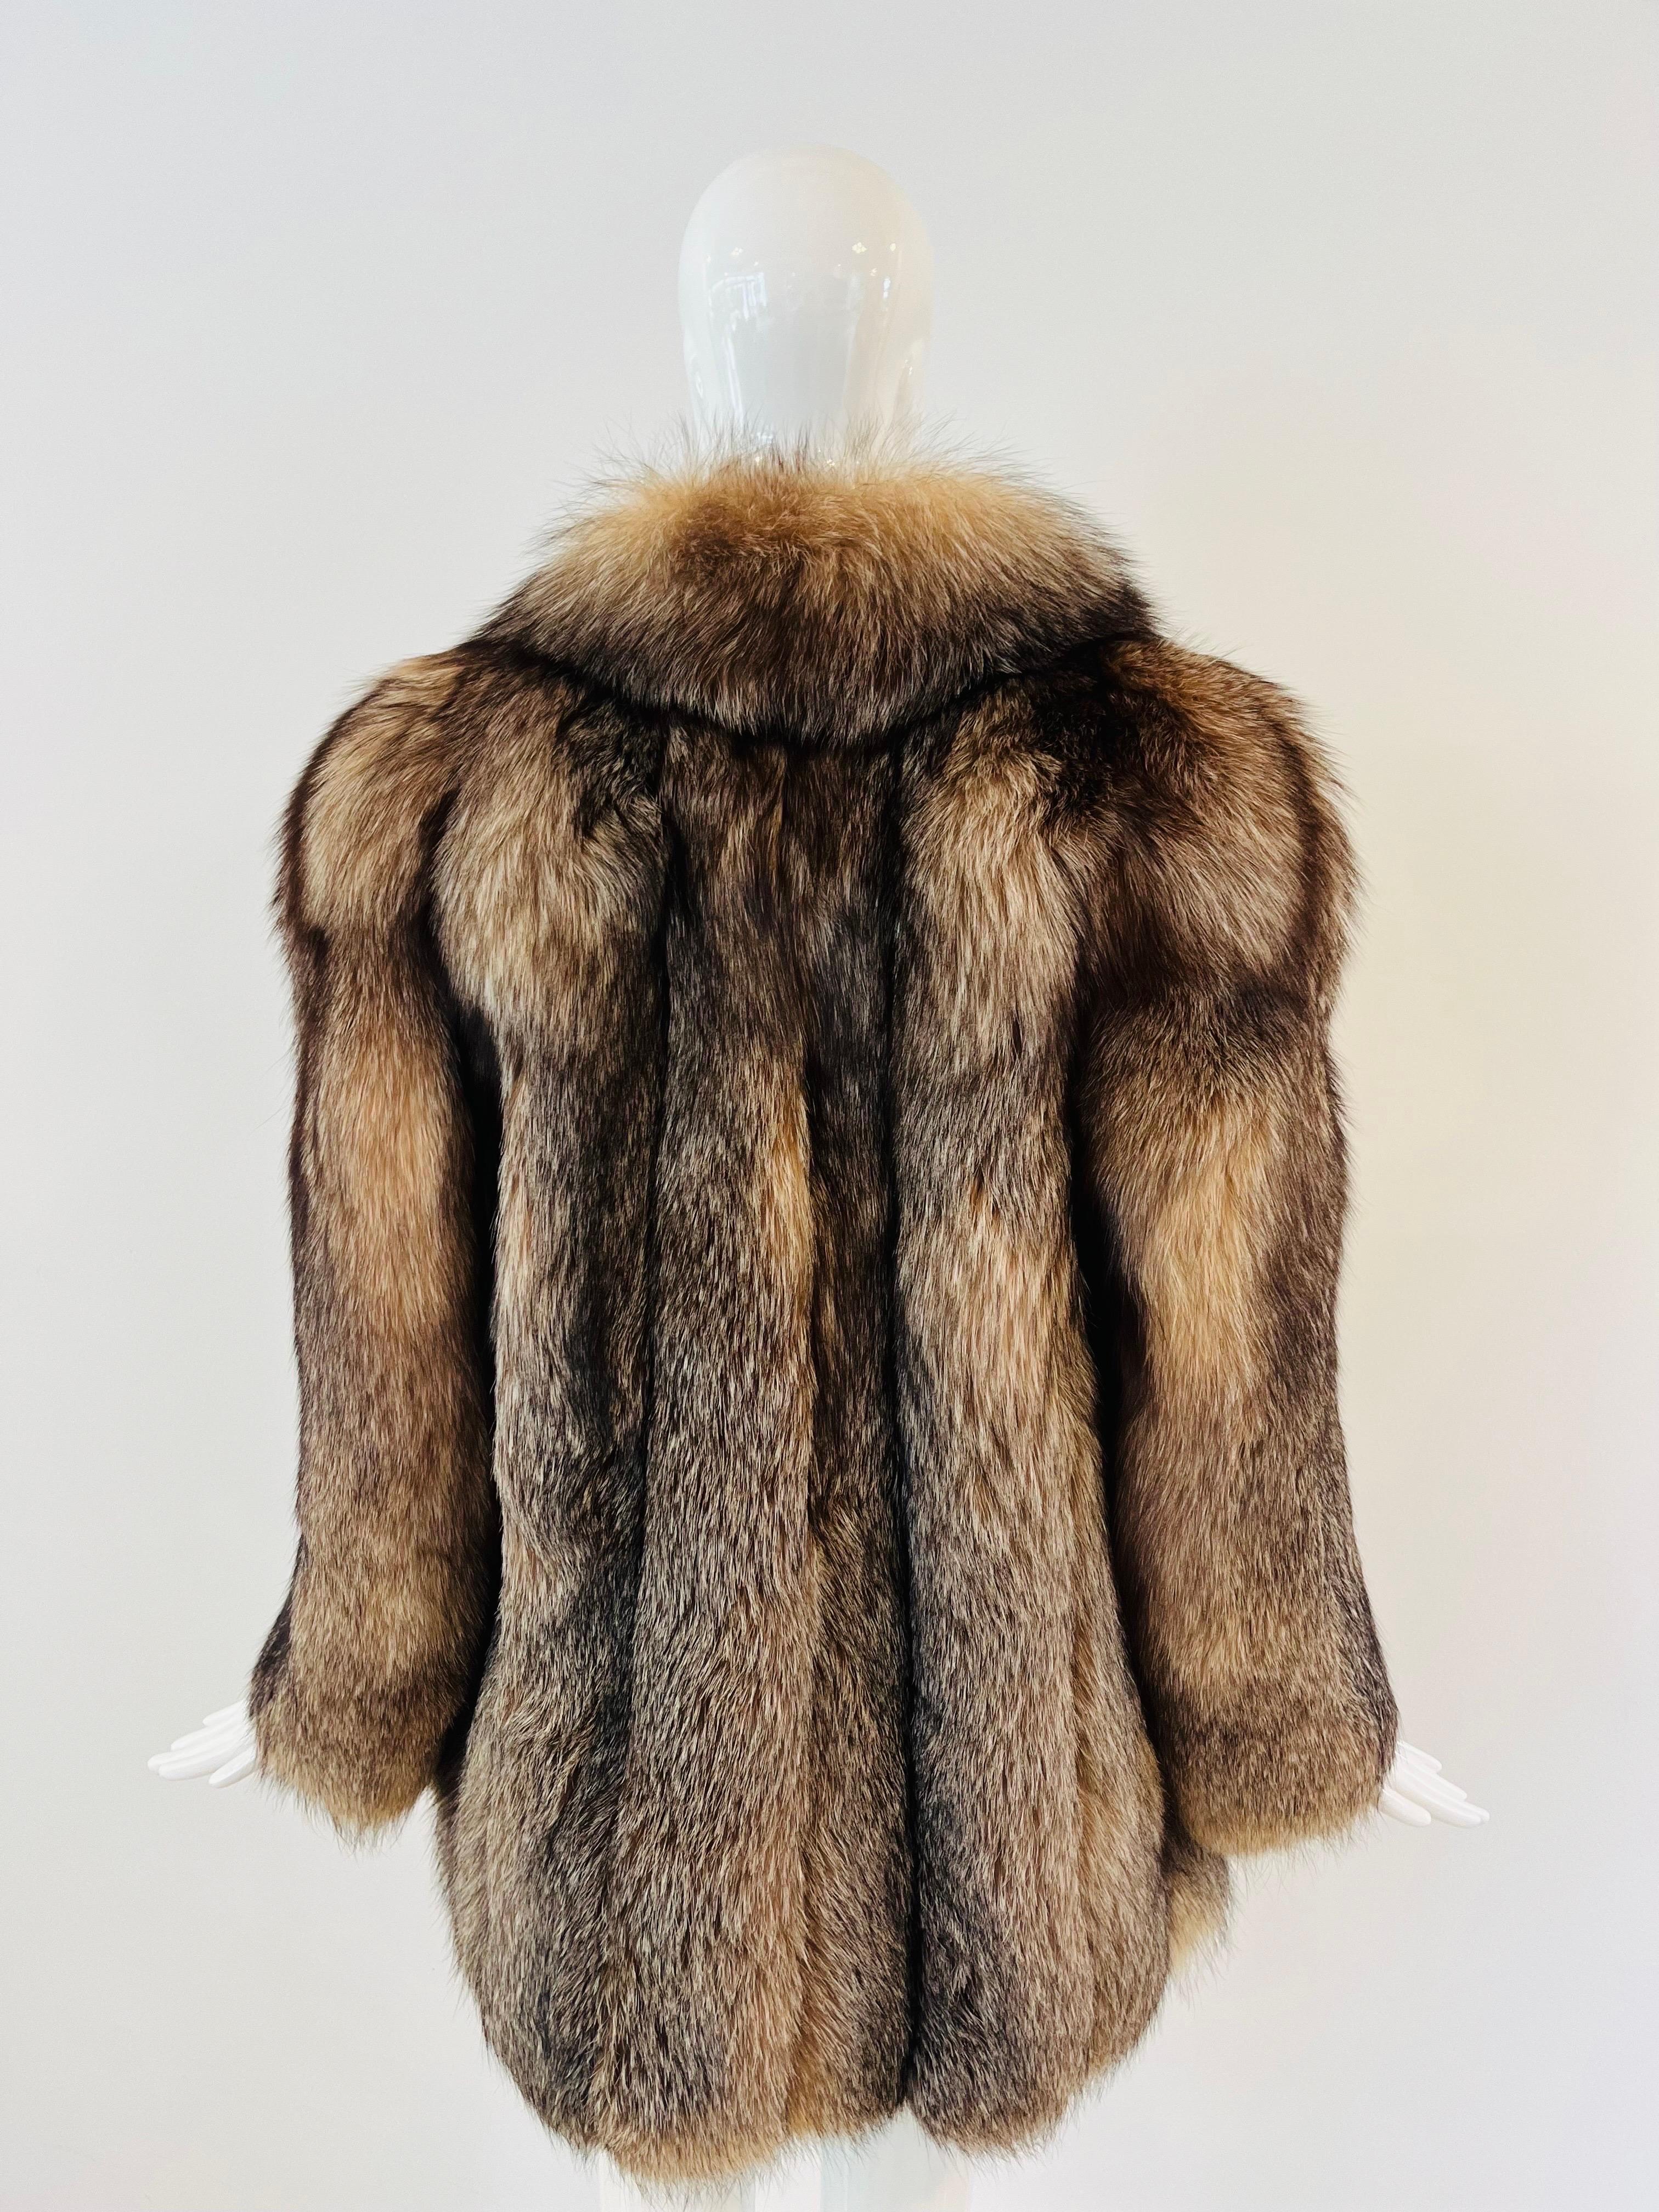 Absolutely gorgeous Bill Blass fox fur coat.  Hip length with panelled fur on suede and tufted collar and sleeves.  Lined in a taupe satin, it has two side pockets and a single hook and eye closure.  Excellent condition.

Length 31